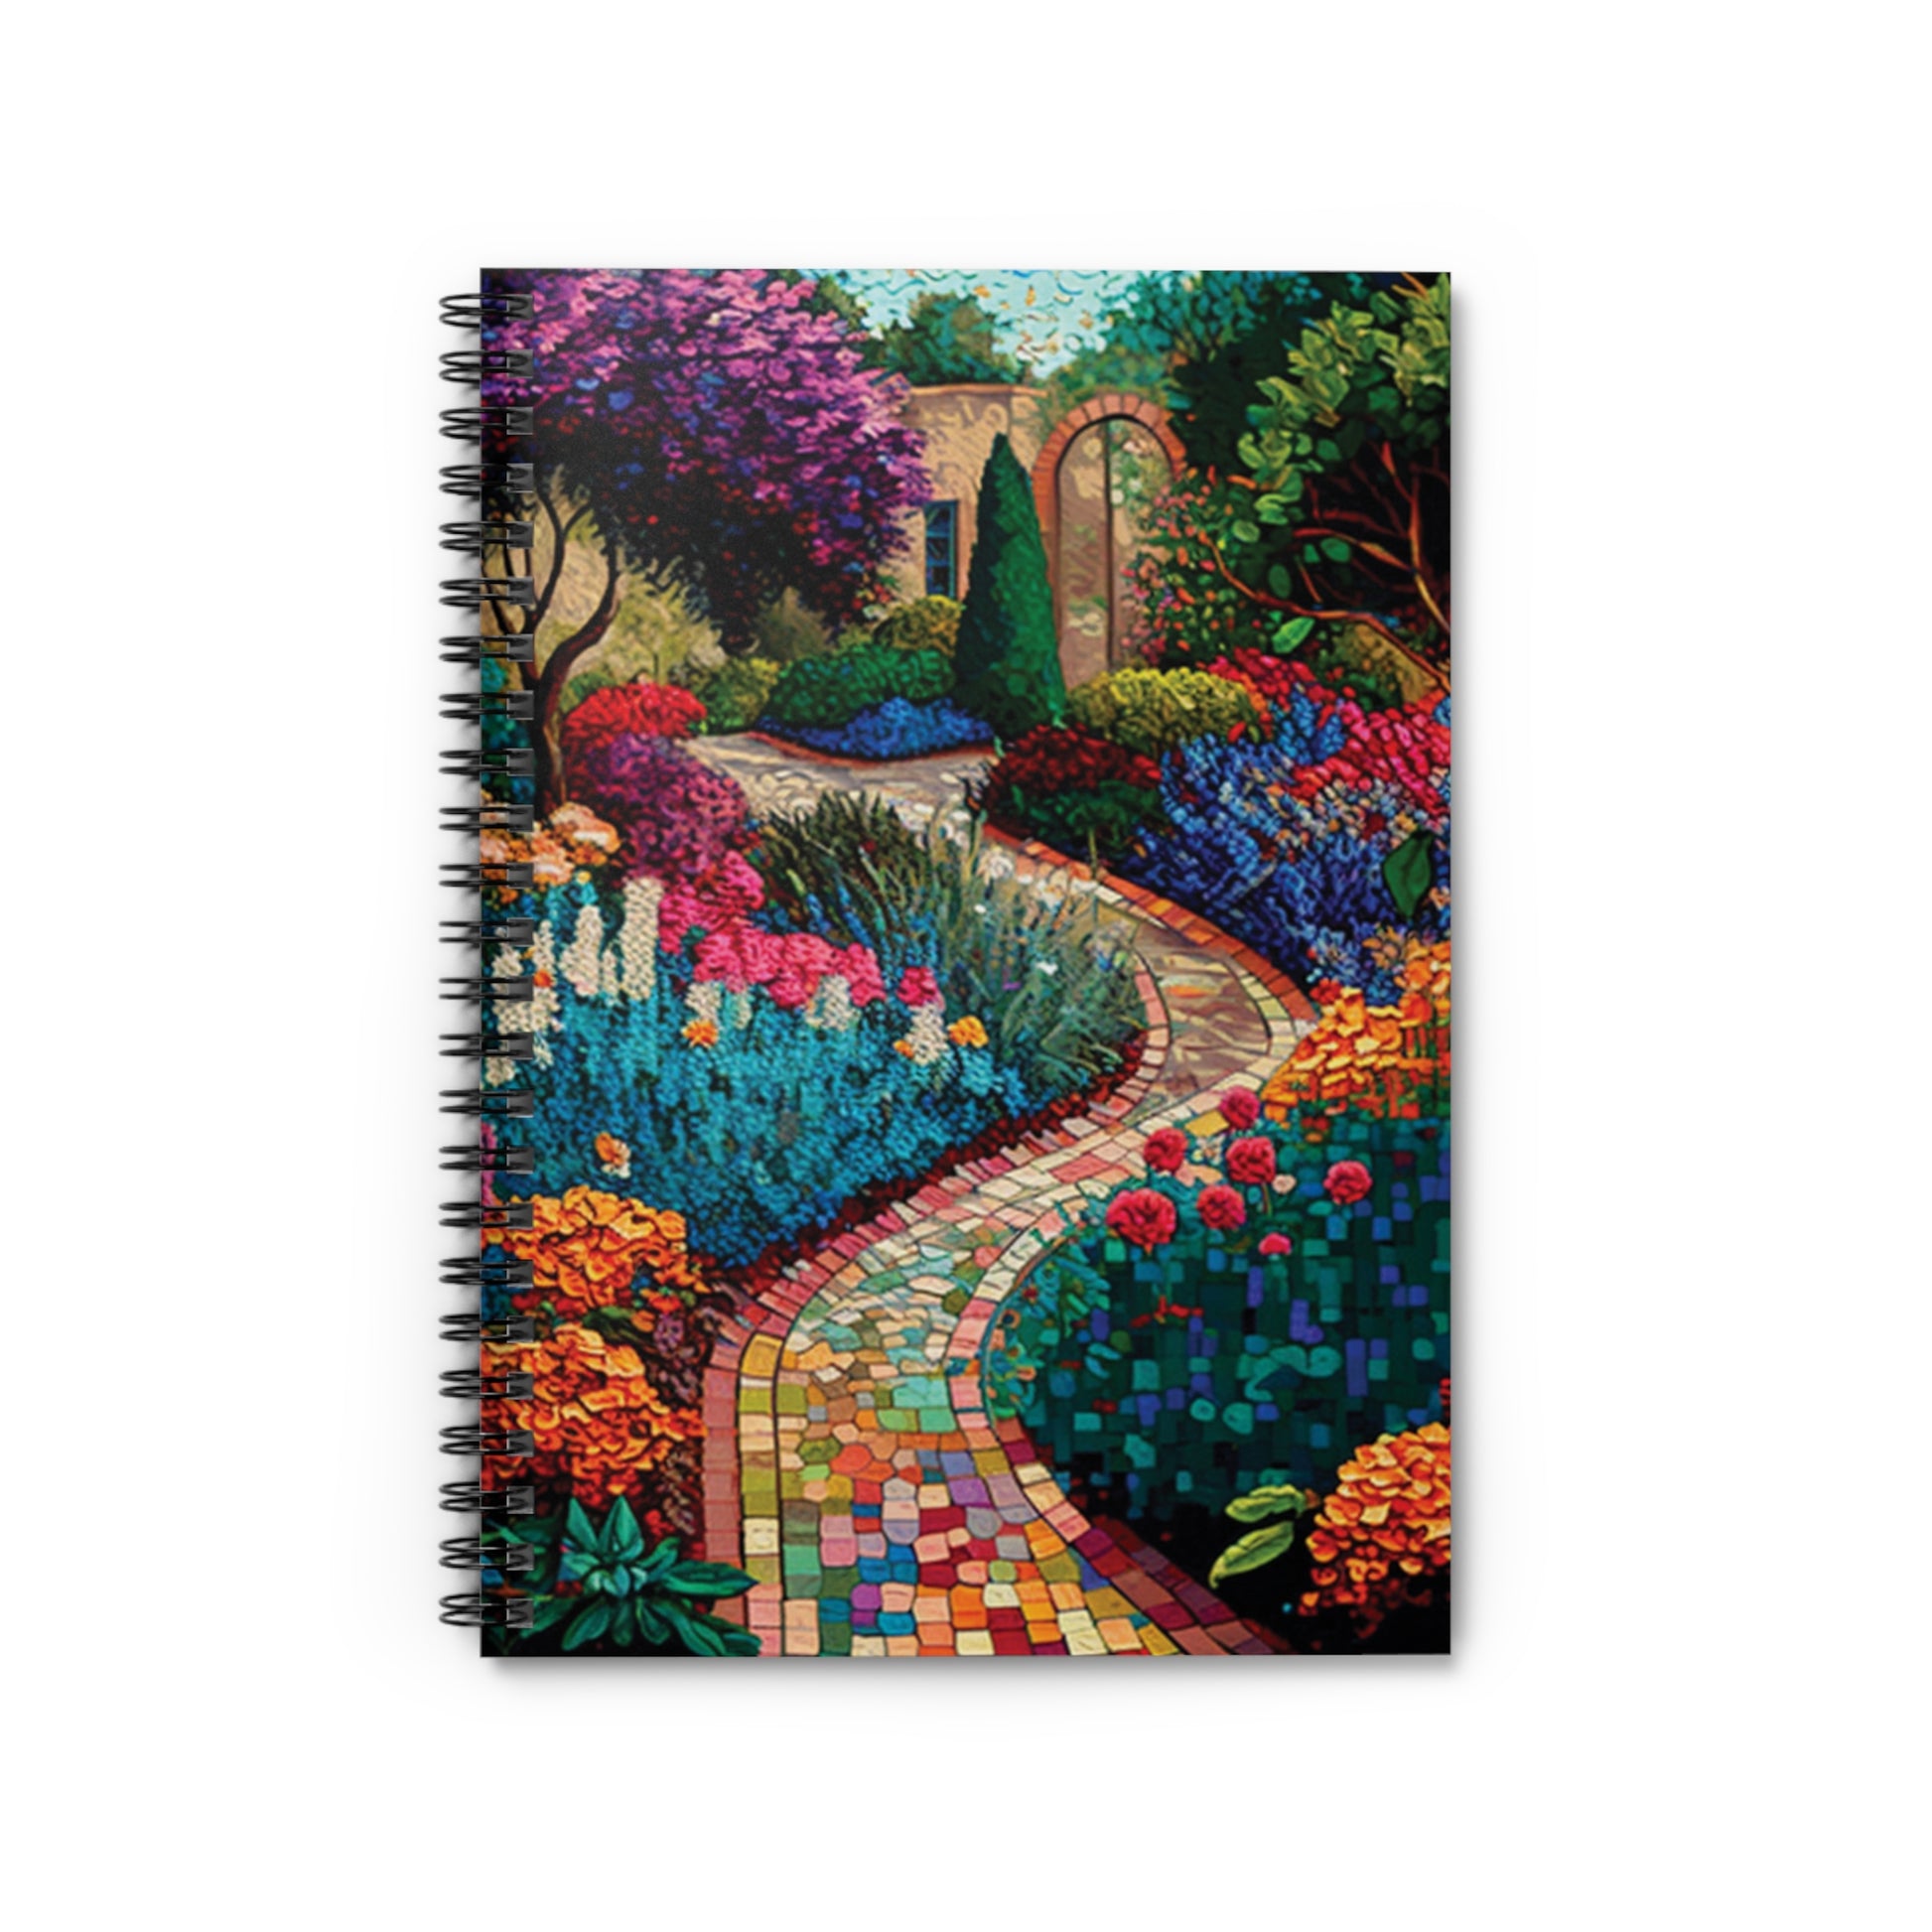 Colorful Garden printed on a spiral notebook